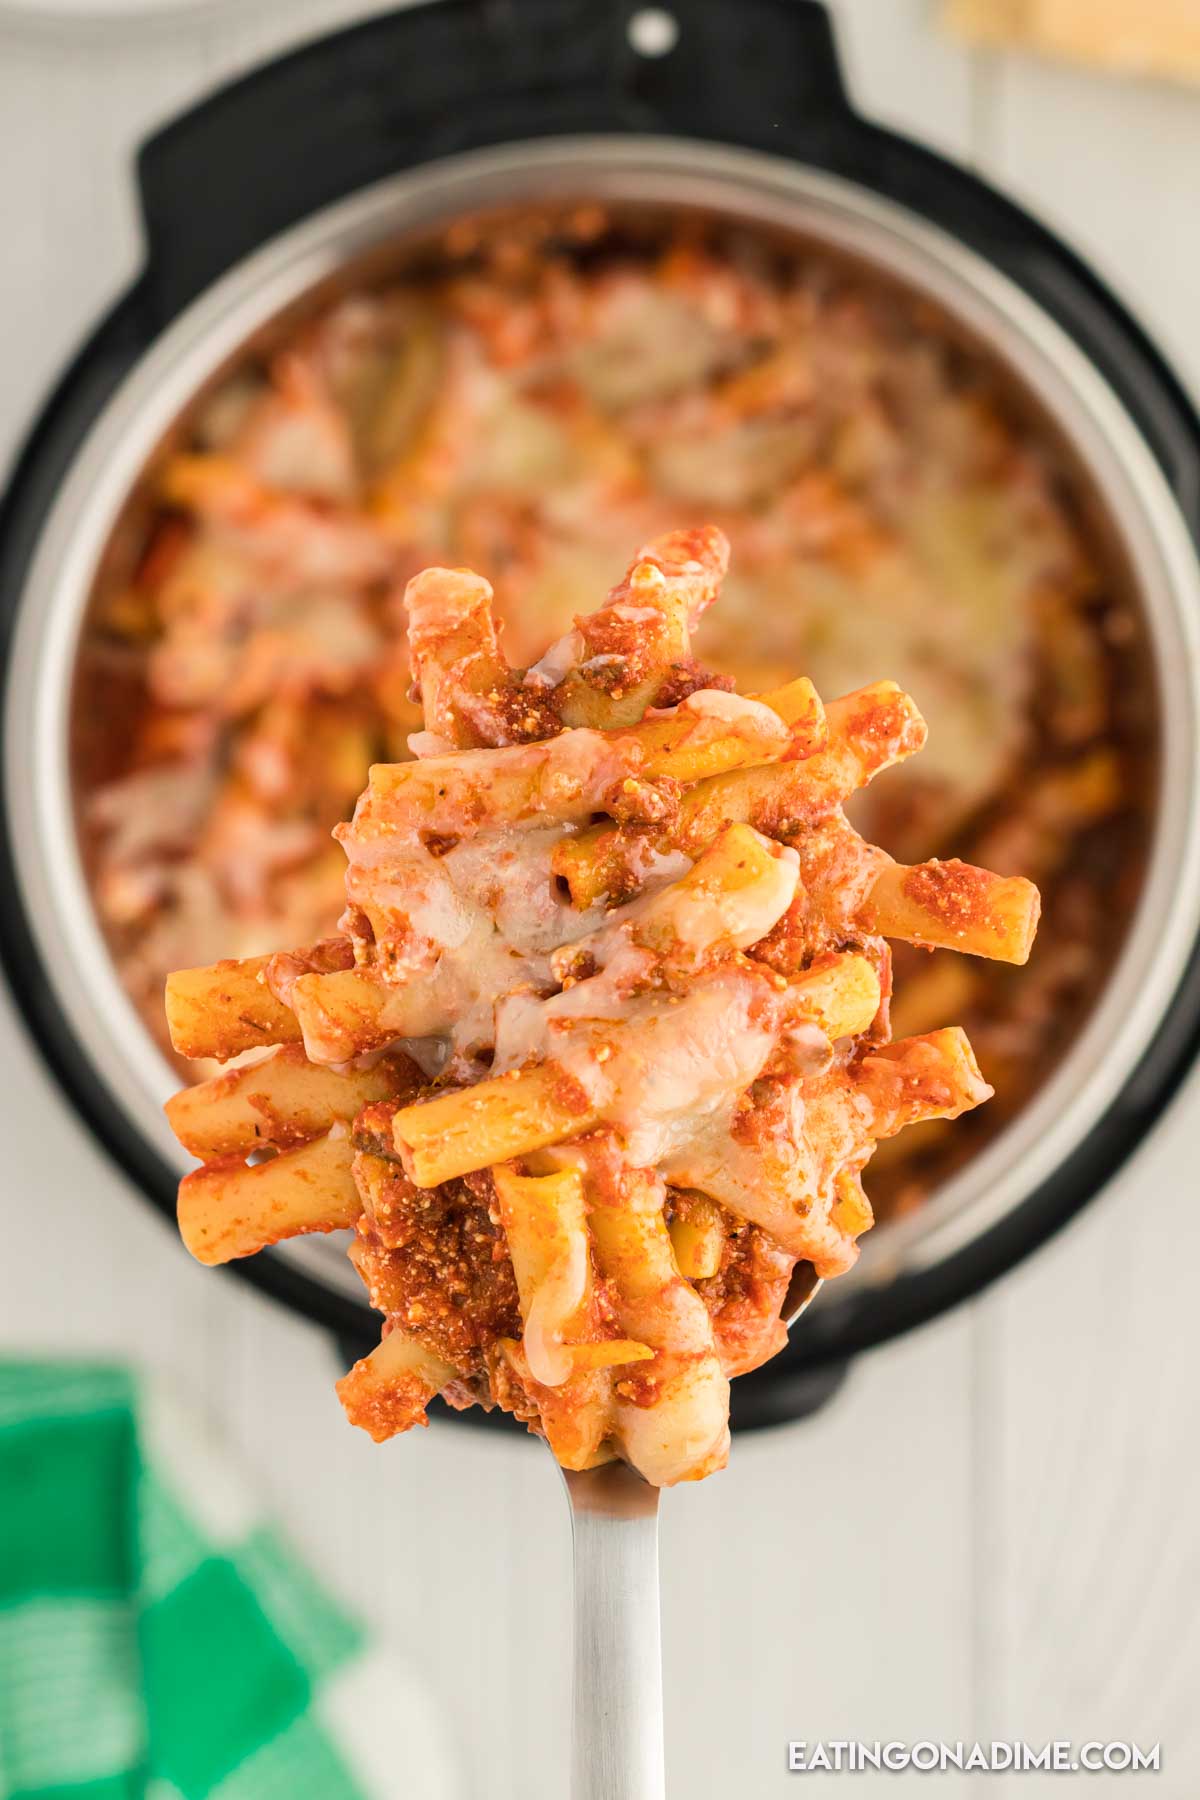 A serving of baked ziti on a spoon